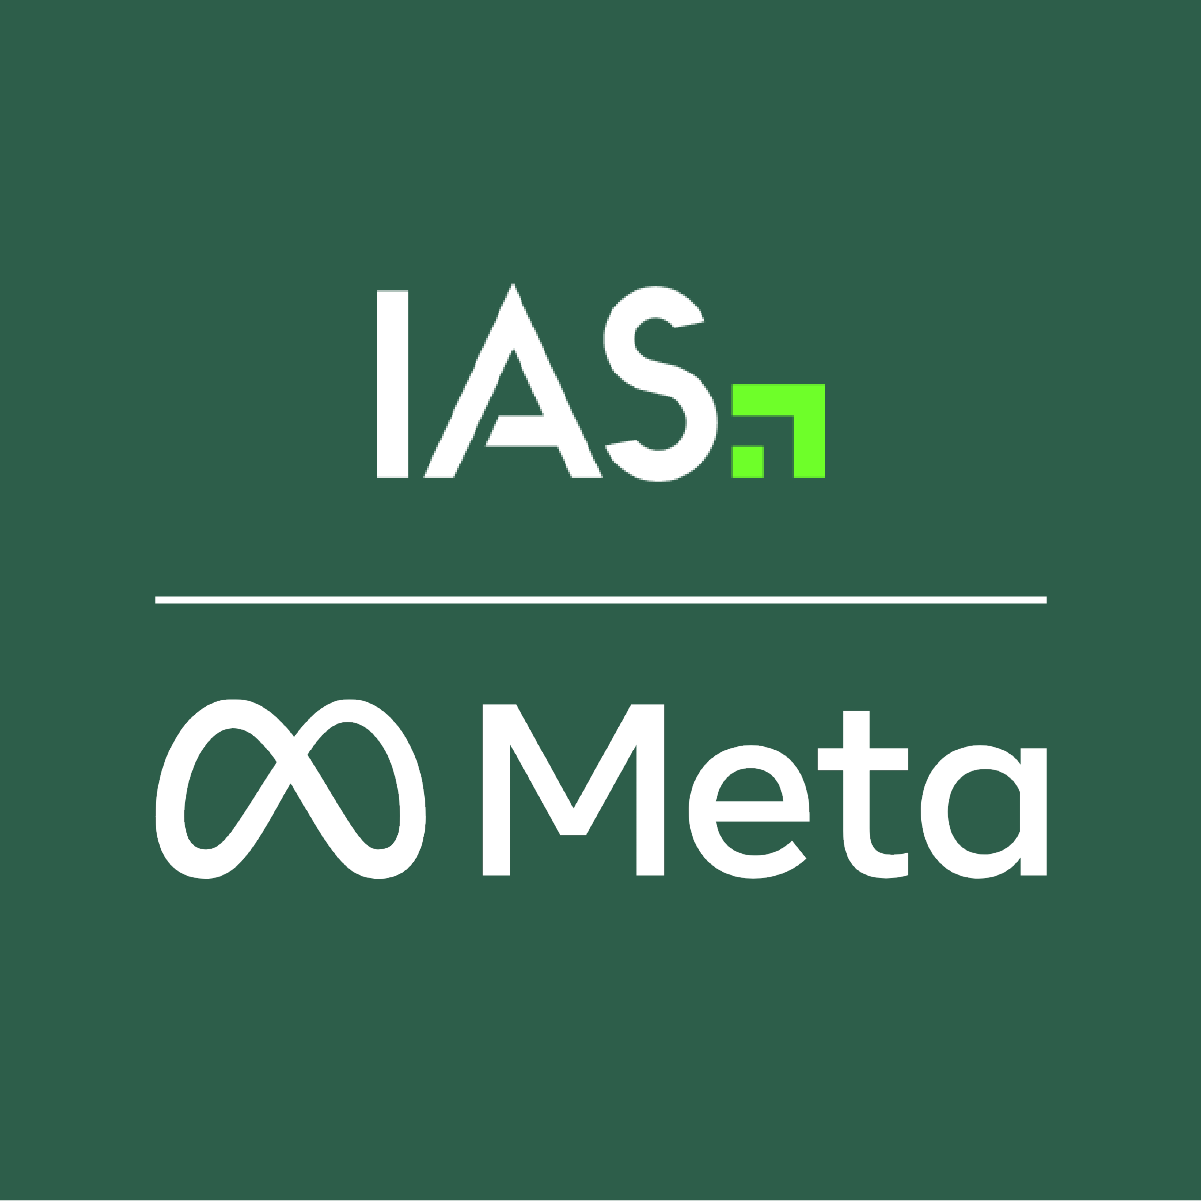 IAS Expands Meta Capabilities; Rolling Out Ad Measurement Tools for Facebook and Instagram Reels